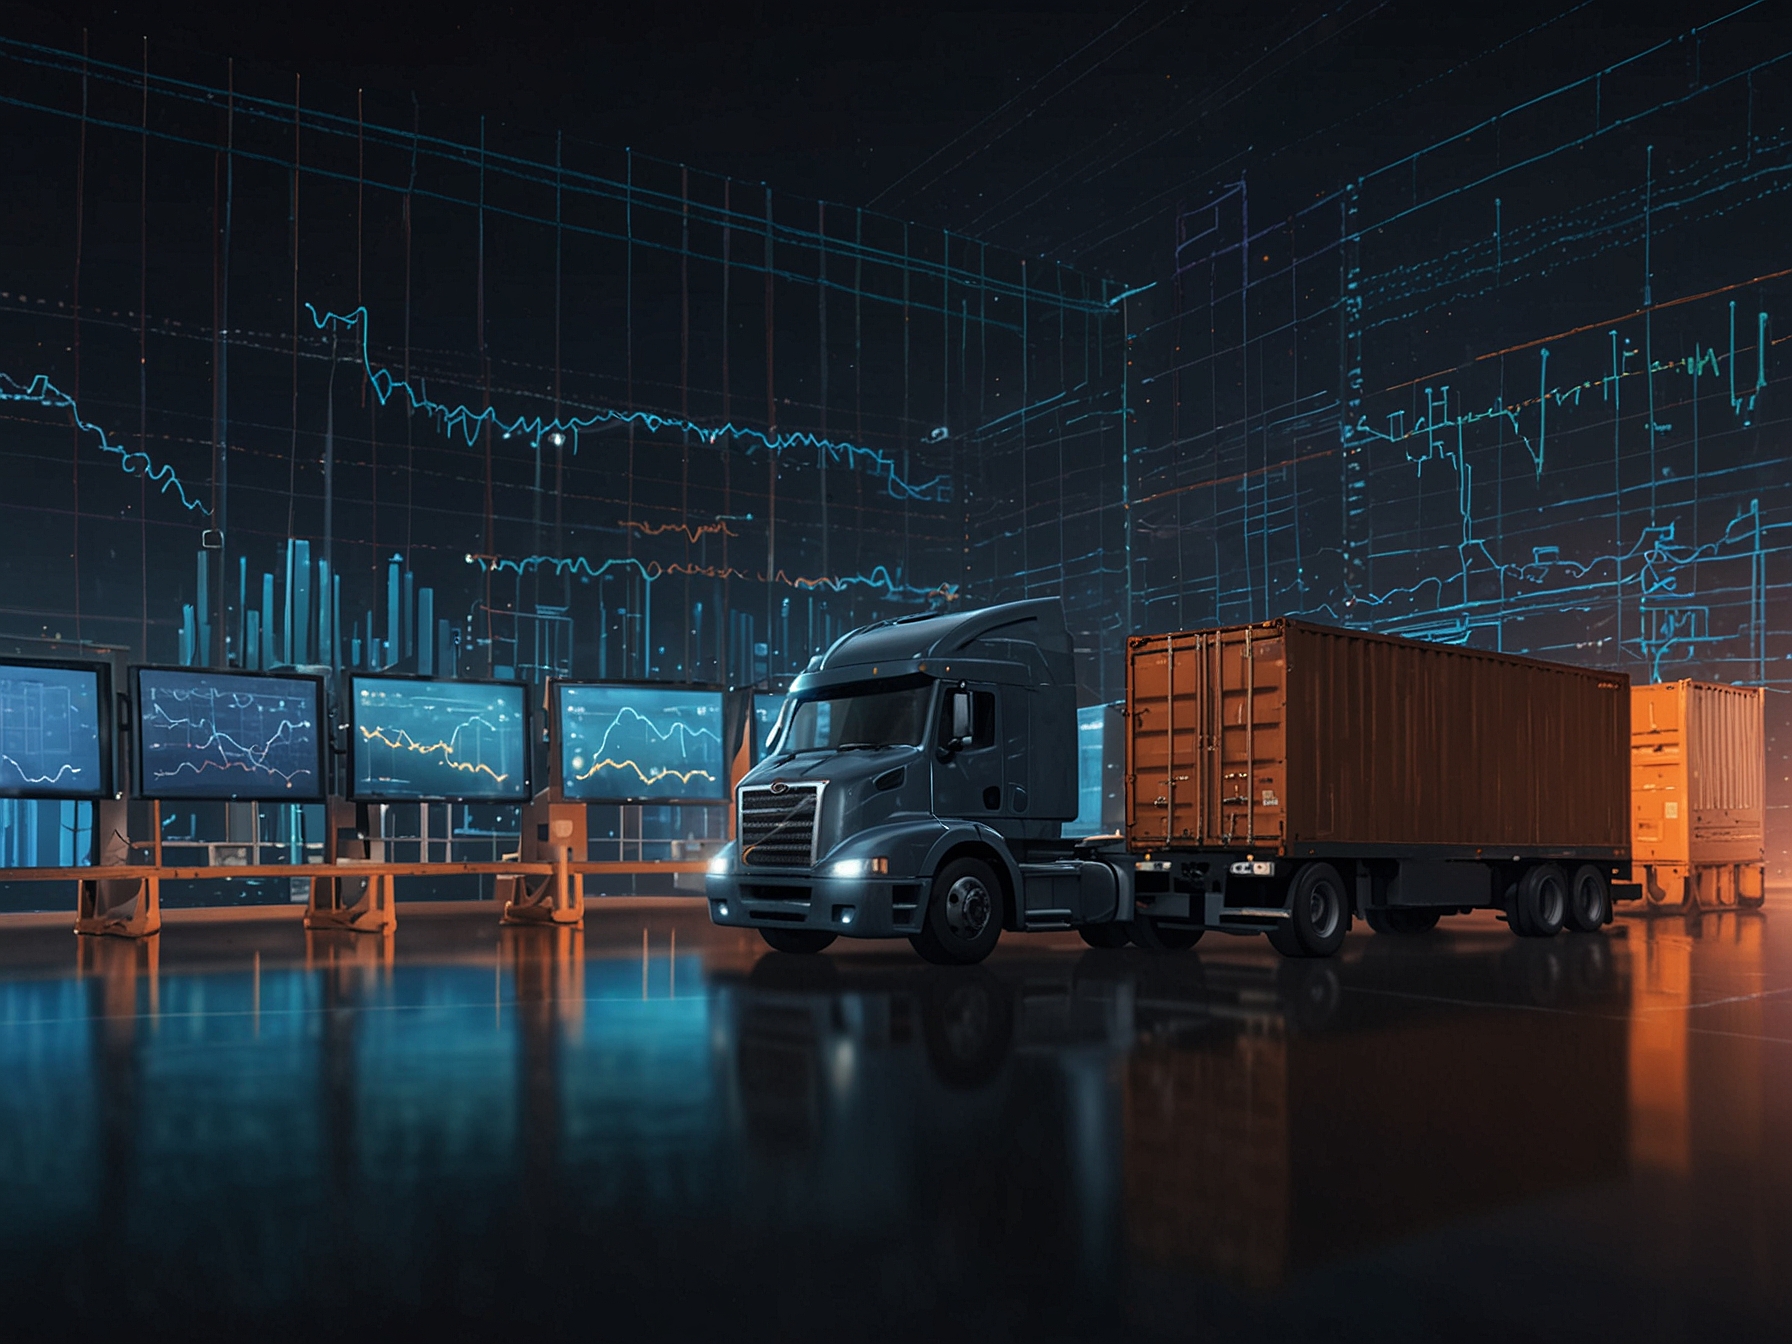 An illustration of an AI system analyzing vast amounts of data to forecast demand and optimize logistics routes, showcasing the predictive analytics capabilities of AI.